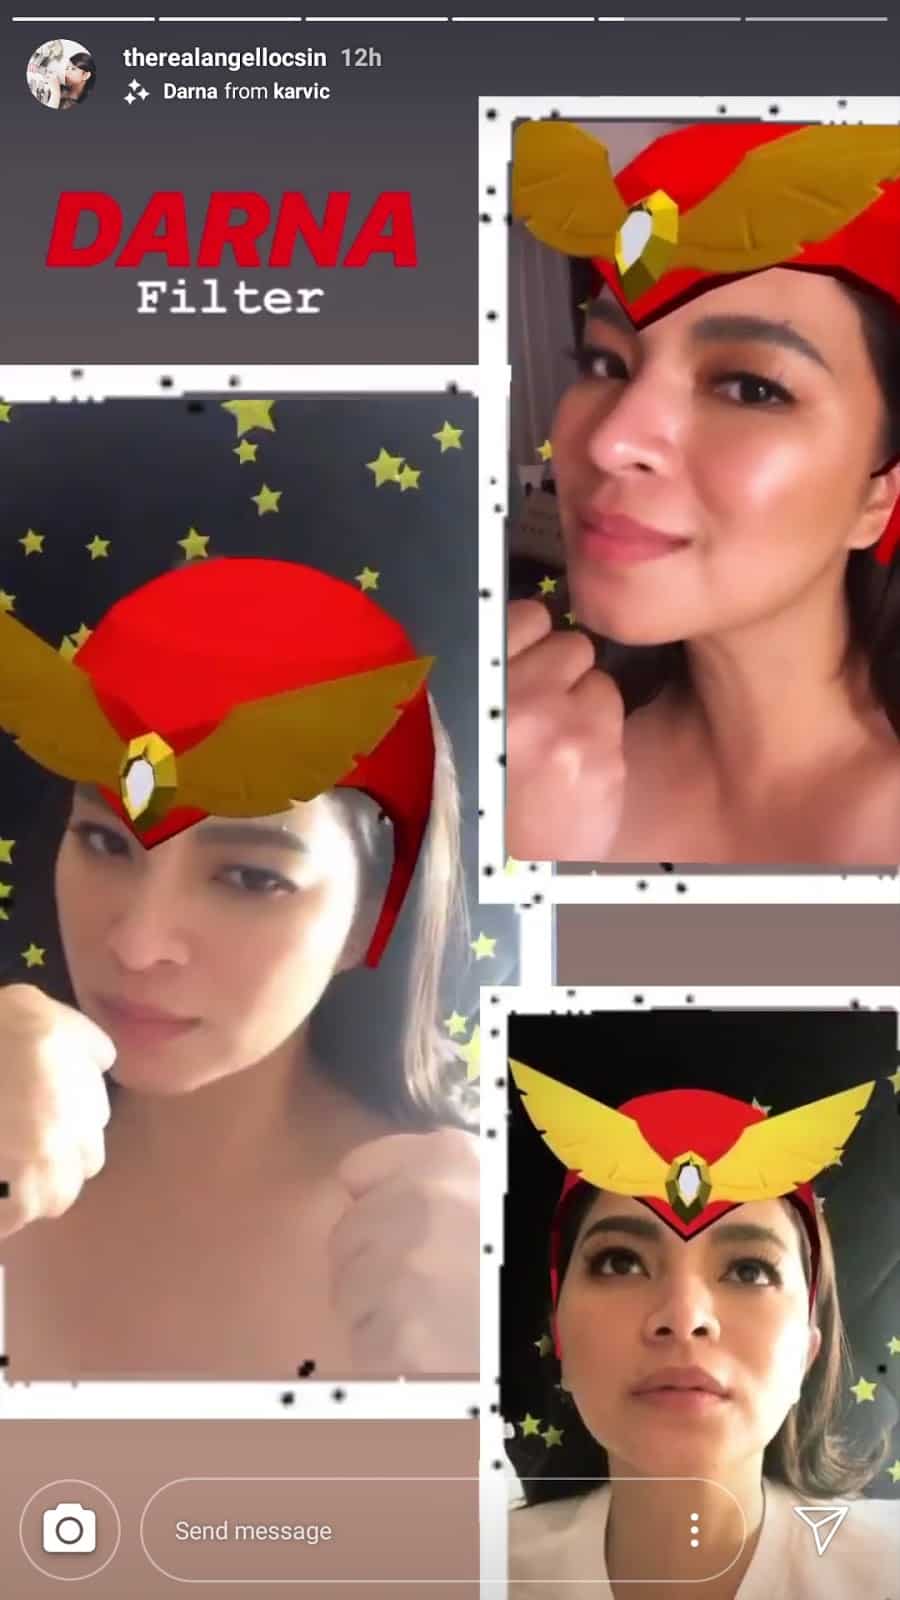 Angel Locsin posts photo with Darna filter; netizens react